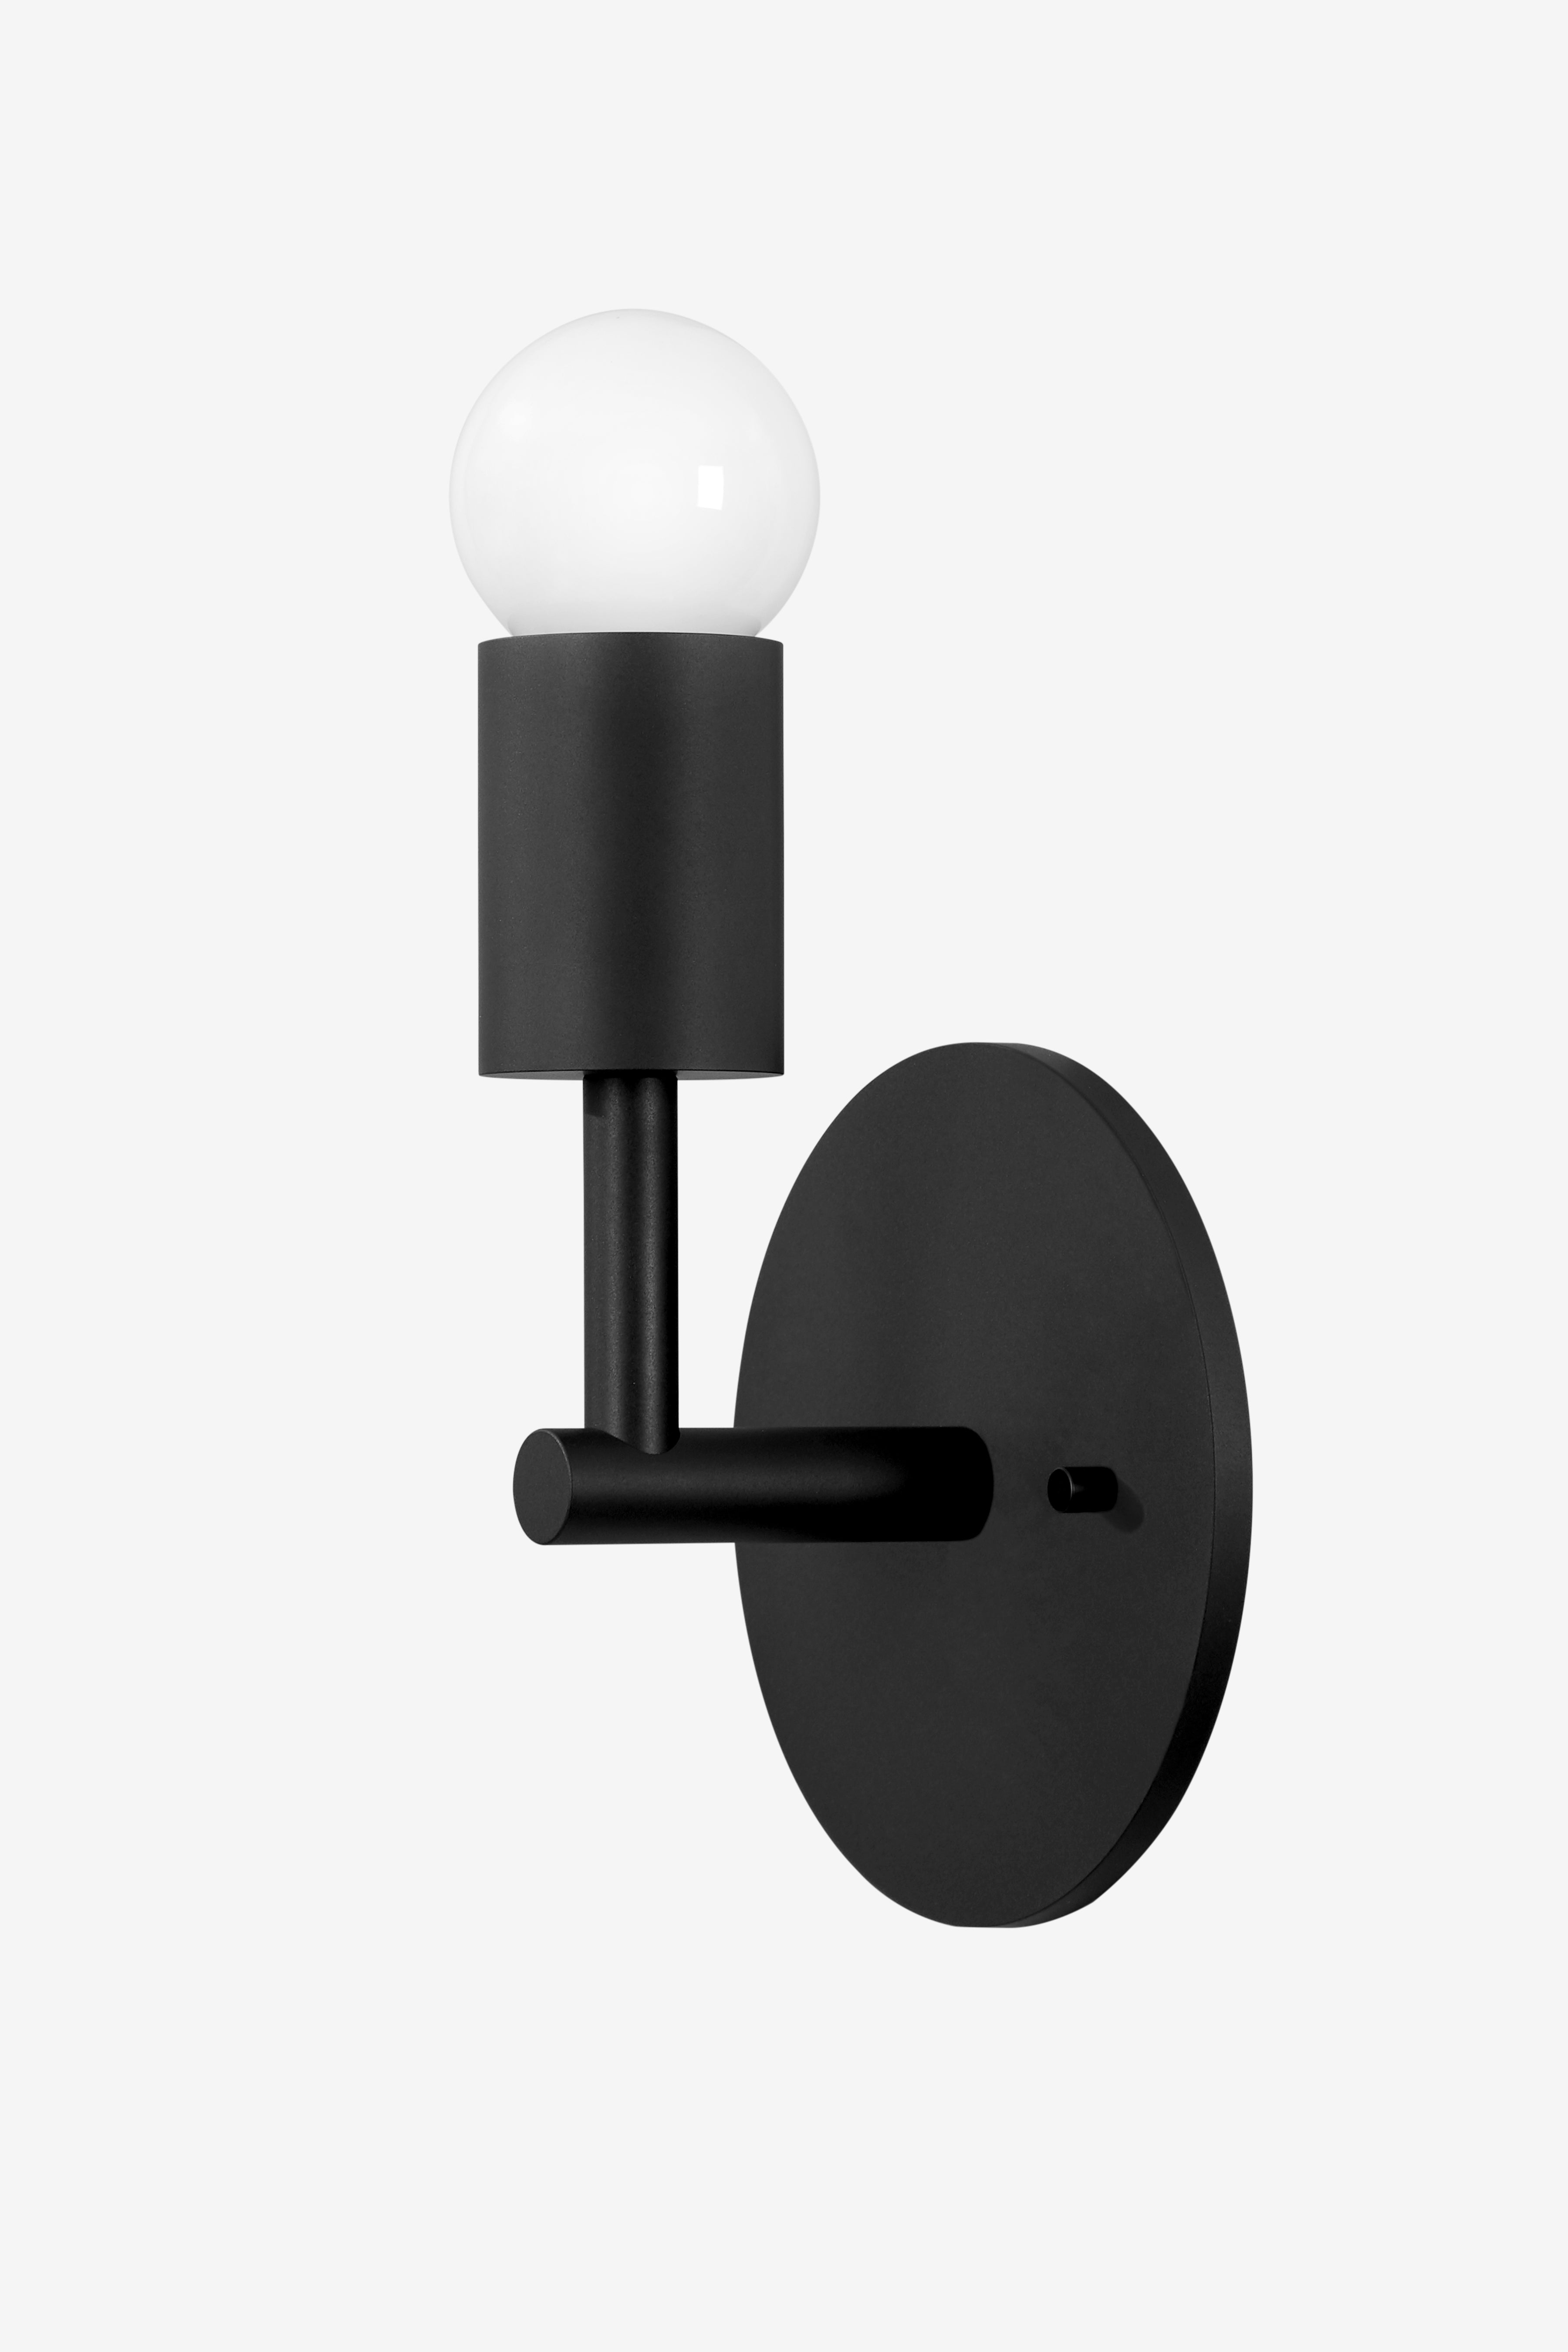 Afton Small QS / Sconce / Black